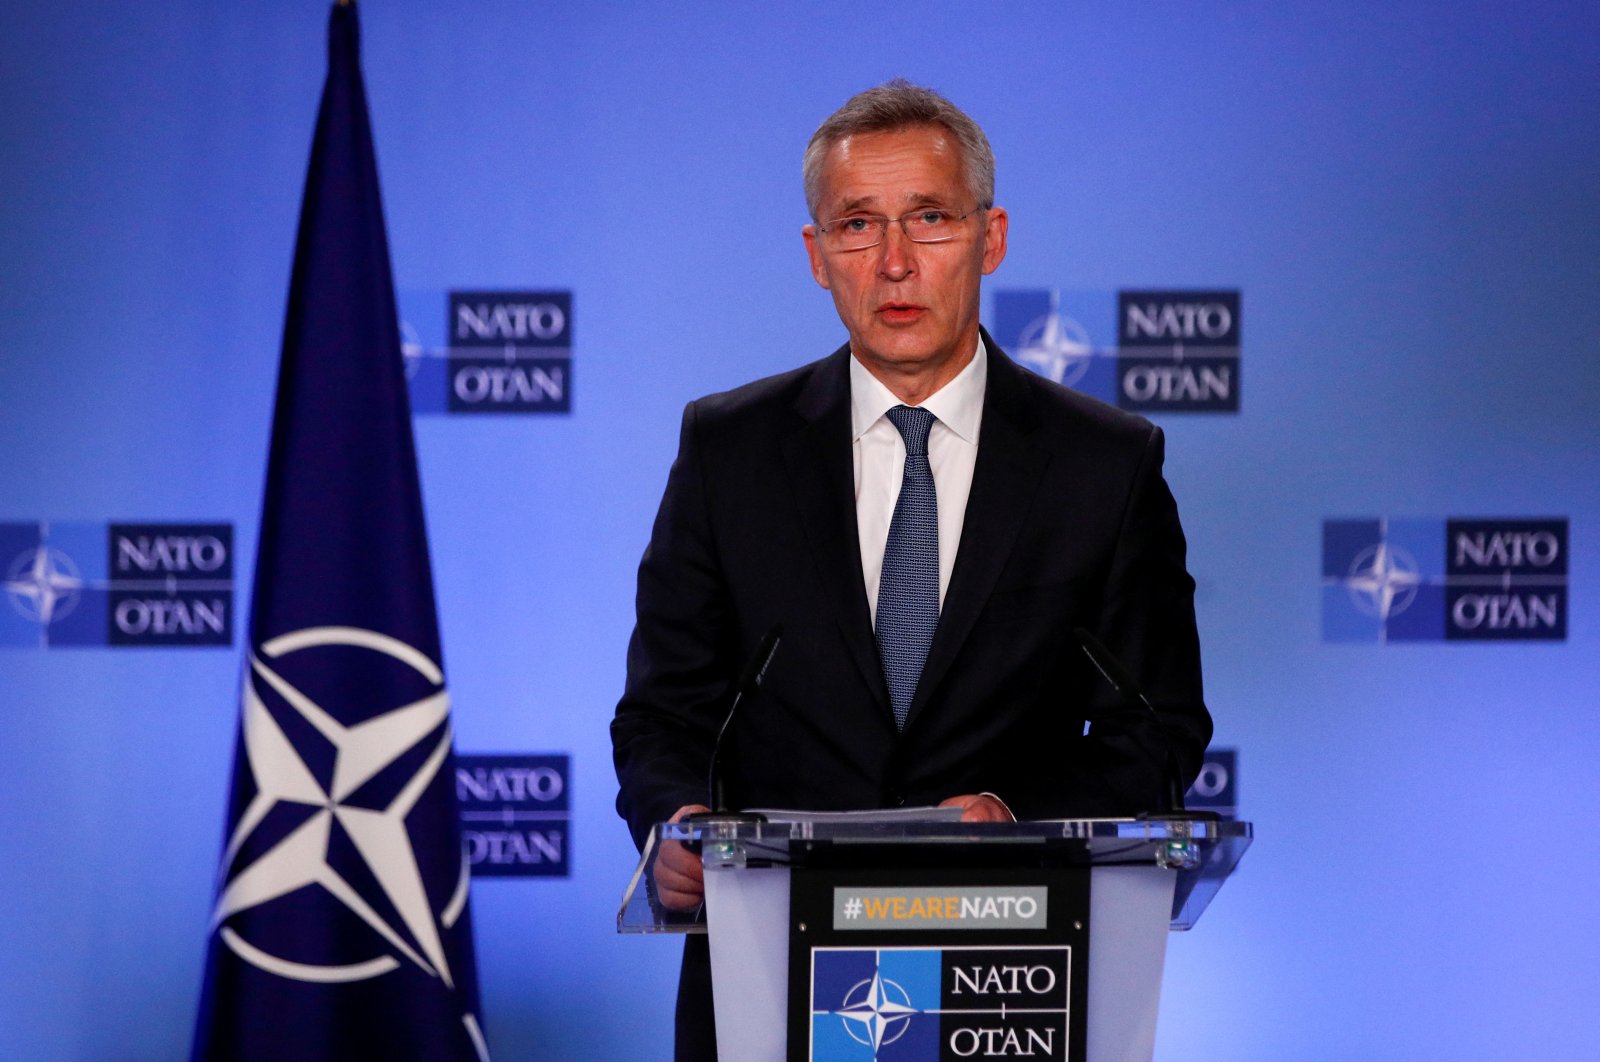 NATO Secretary-General Jens Stoltenberg attends a joint news conference with North Macedonian Prime Minister Dimitar Kovacevski (not shown) in Brussels, Belgium, Feb. 3, 2022. (Reuters Photo)